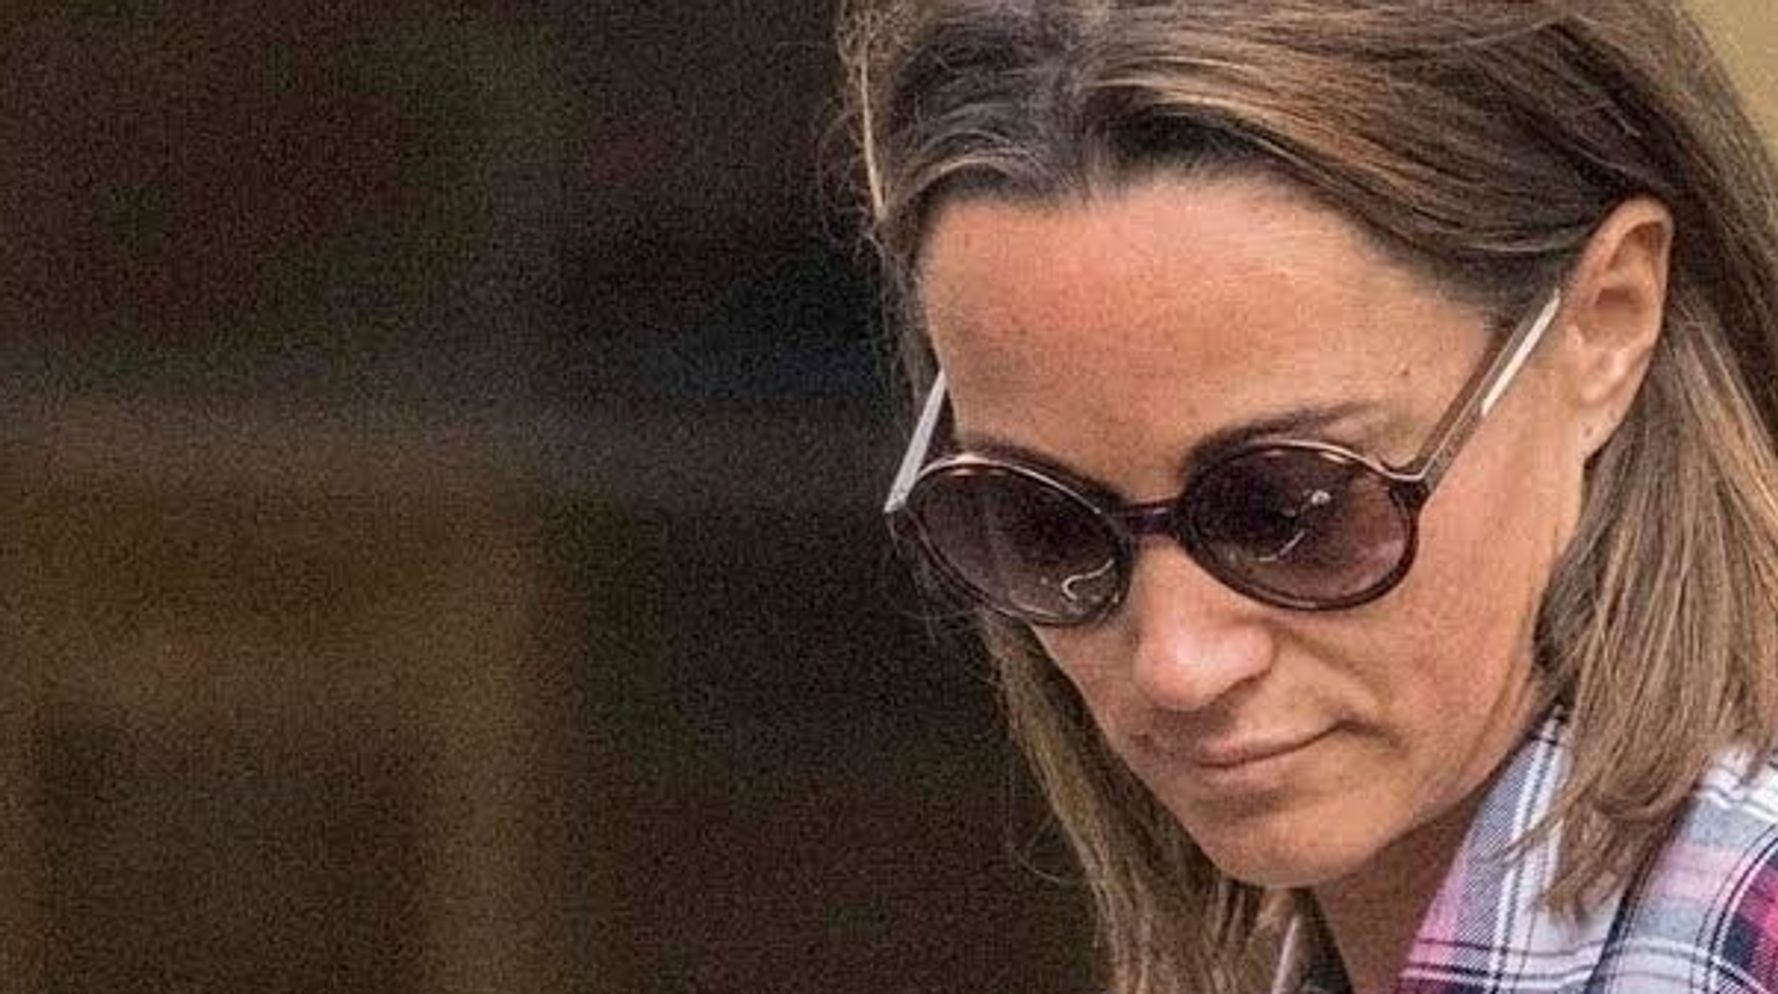 Pippa Middleton Has A Chic New Haircut And We Want It, Too | HuffPost ...